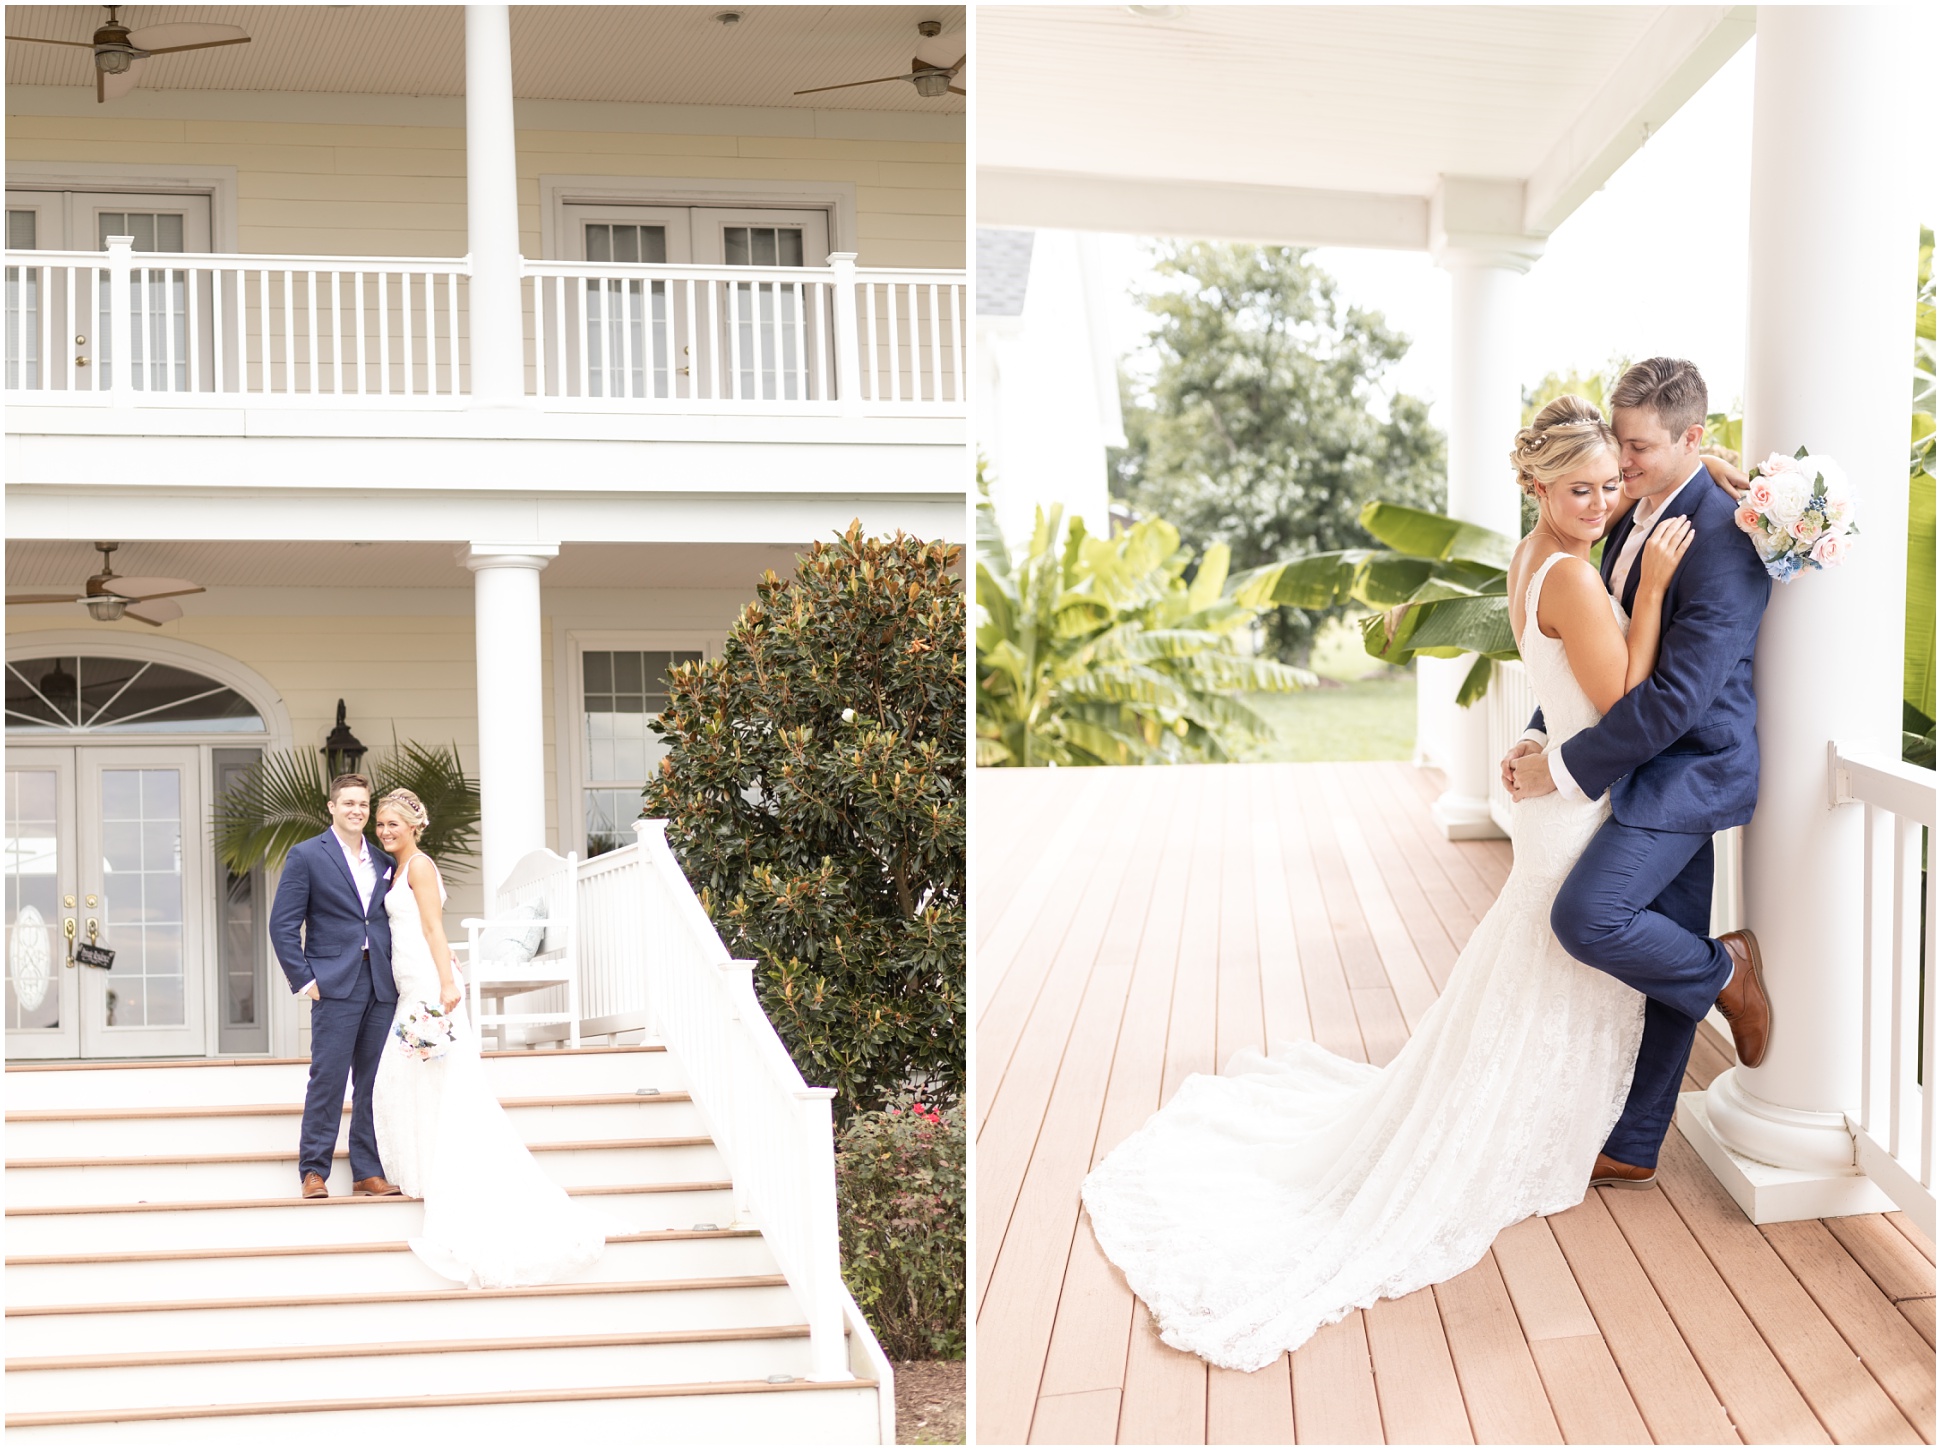 Two images of the bride and groom on the front porch of the mansion at weatherly farms